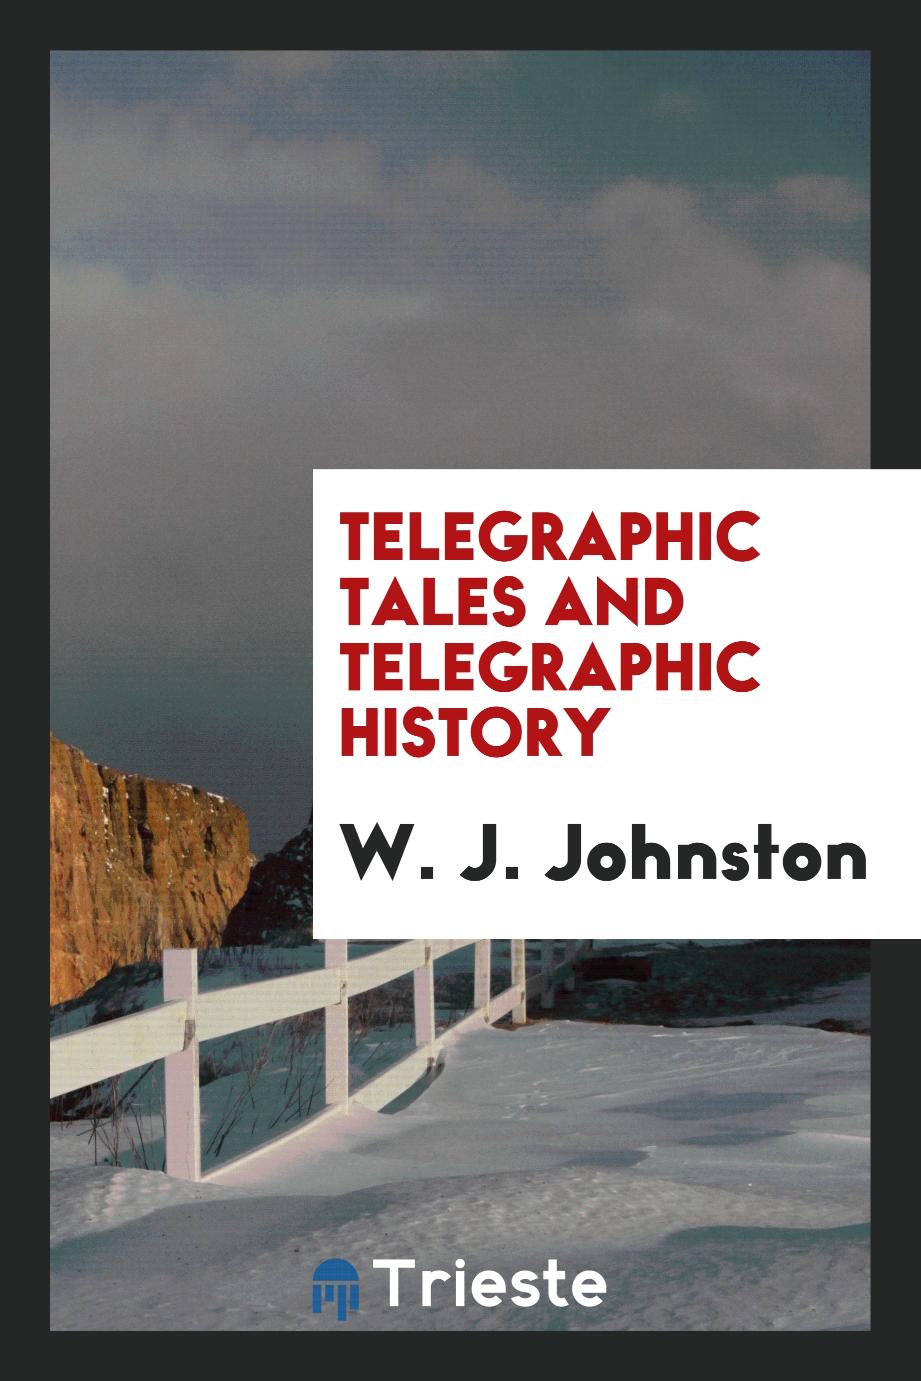 Telegraphic tales and telegraphic history